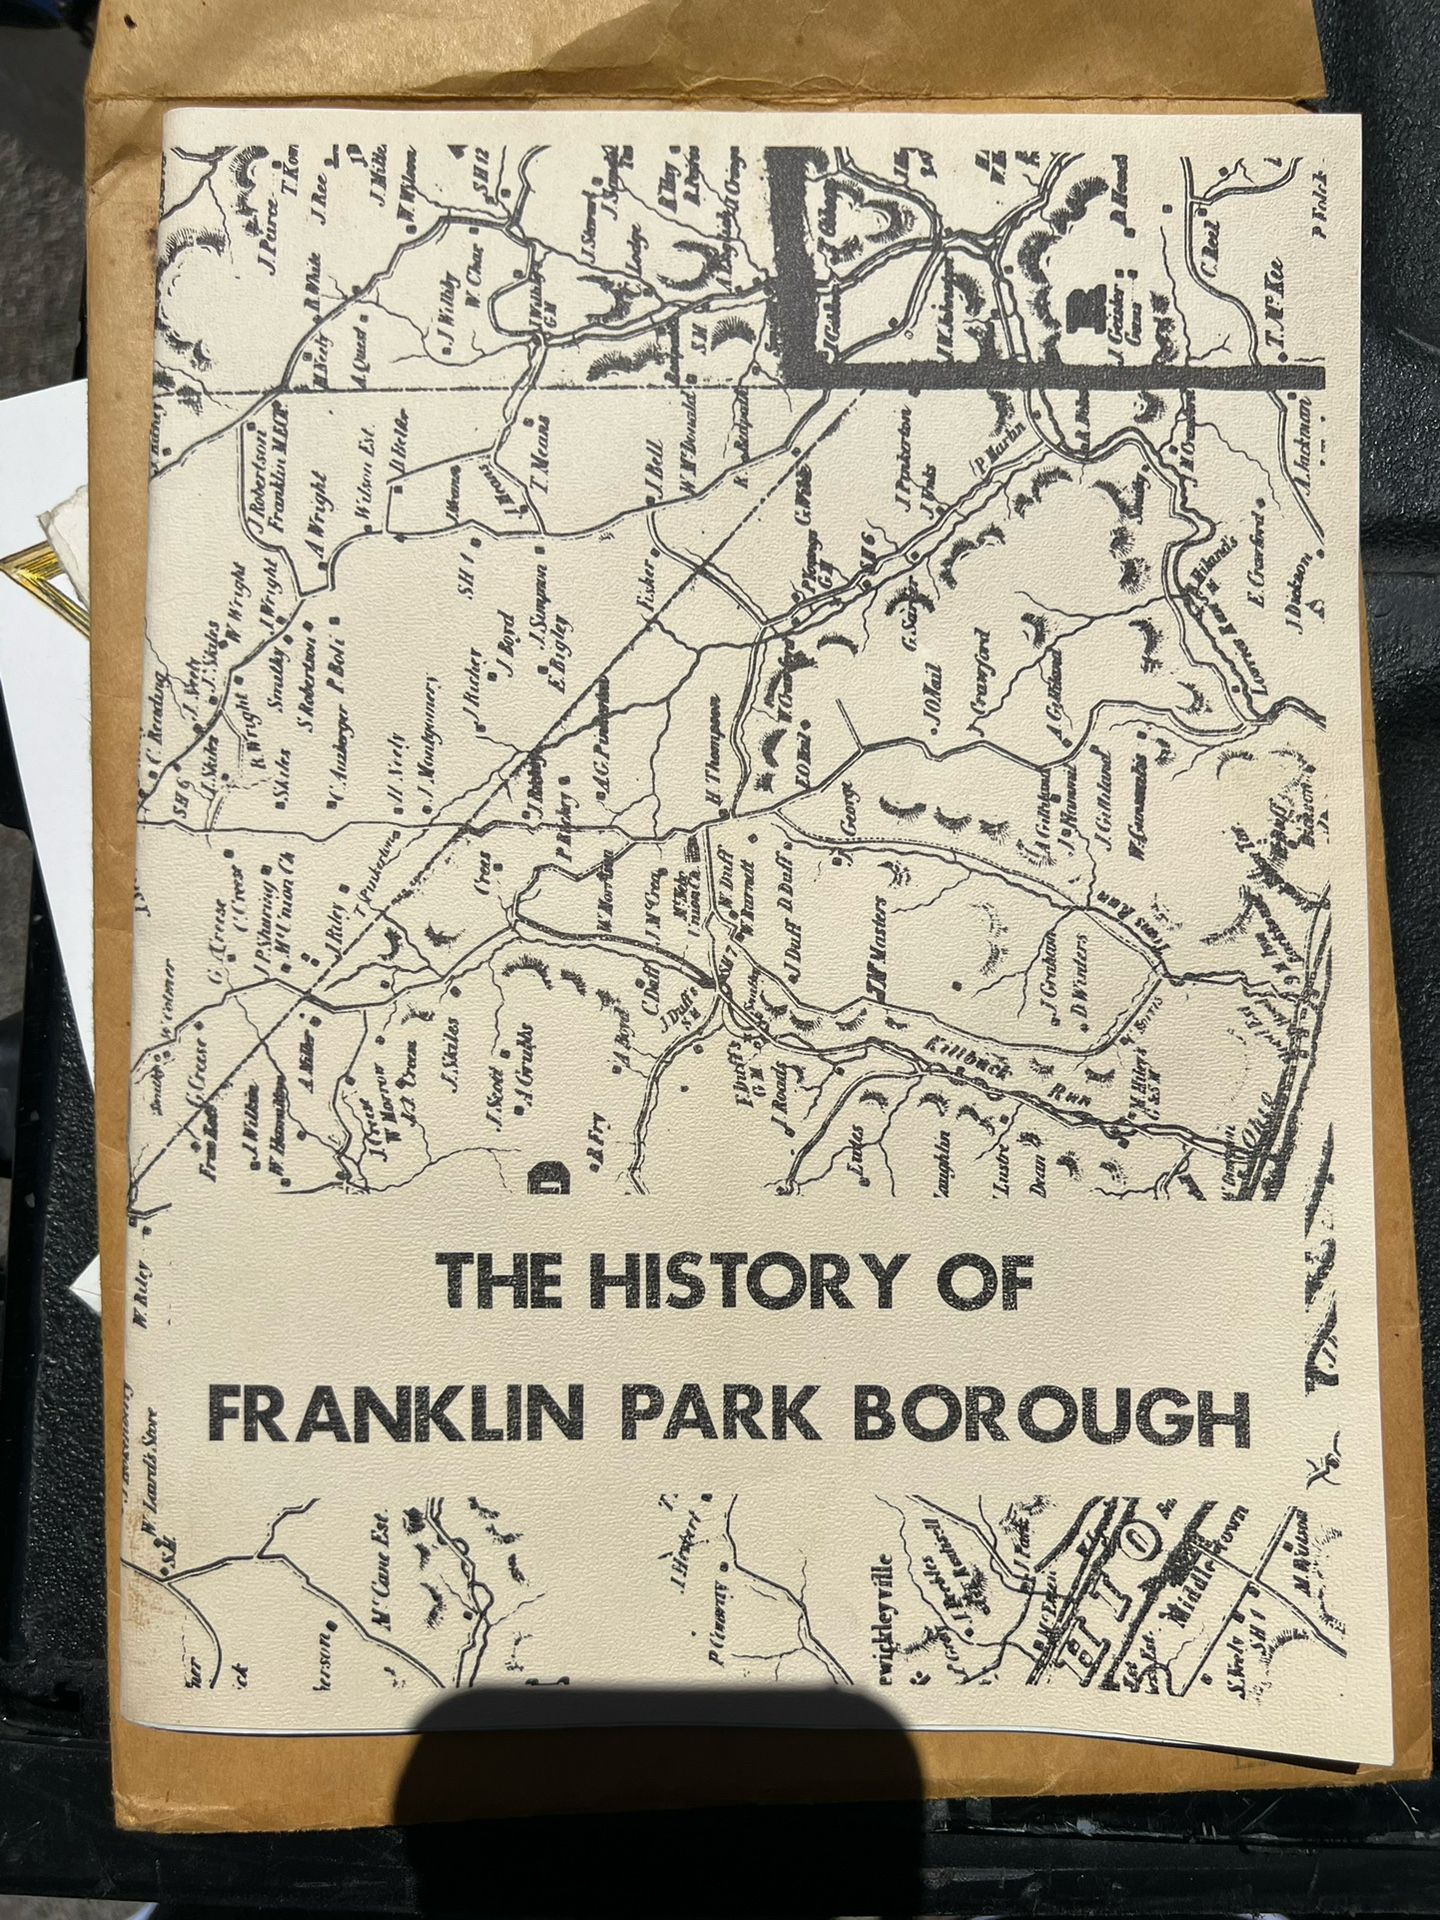  THE HISTORY OF FRANKLIN PARK BOROUGH I Believe Published 1976 . 